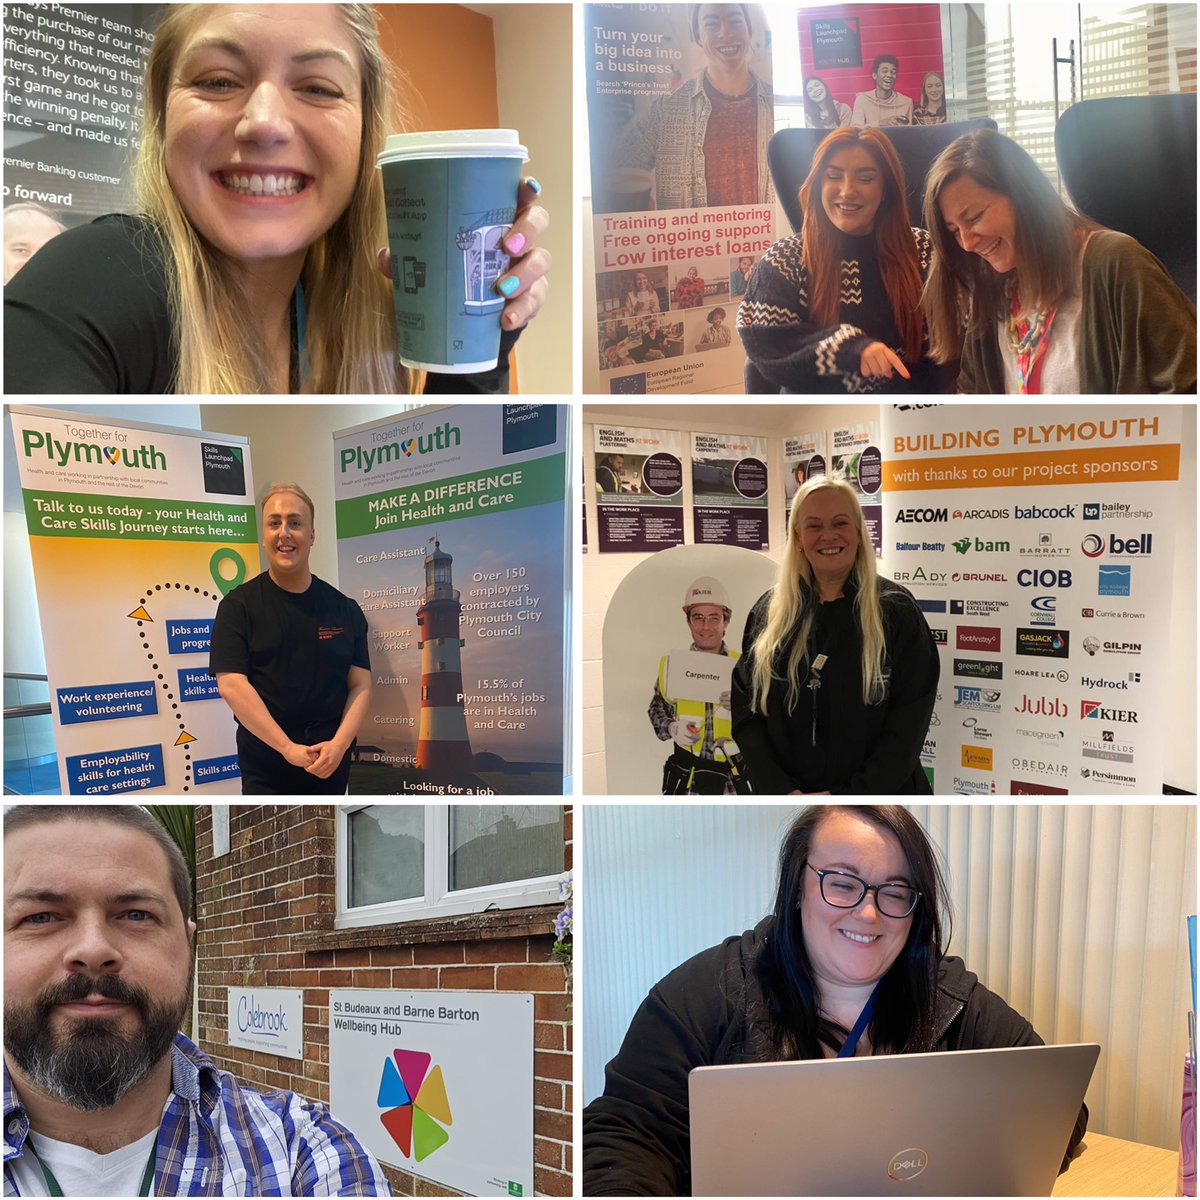 The weather outside is miserable, so here are some smily faces from the Skills Launchpad Plymouth team to brighten your day. Powered by coffee, cookies and a love of helping people even on the gloomiest days 😆 #TeamLaunchpad